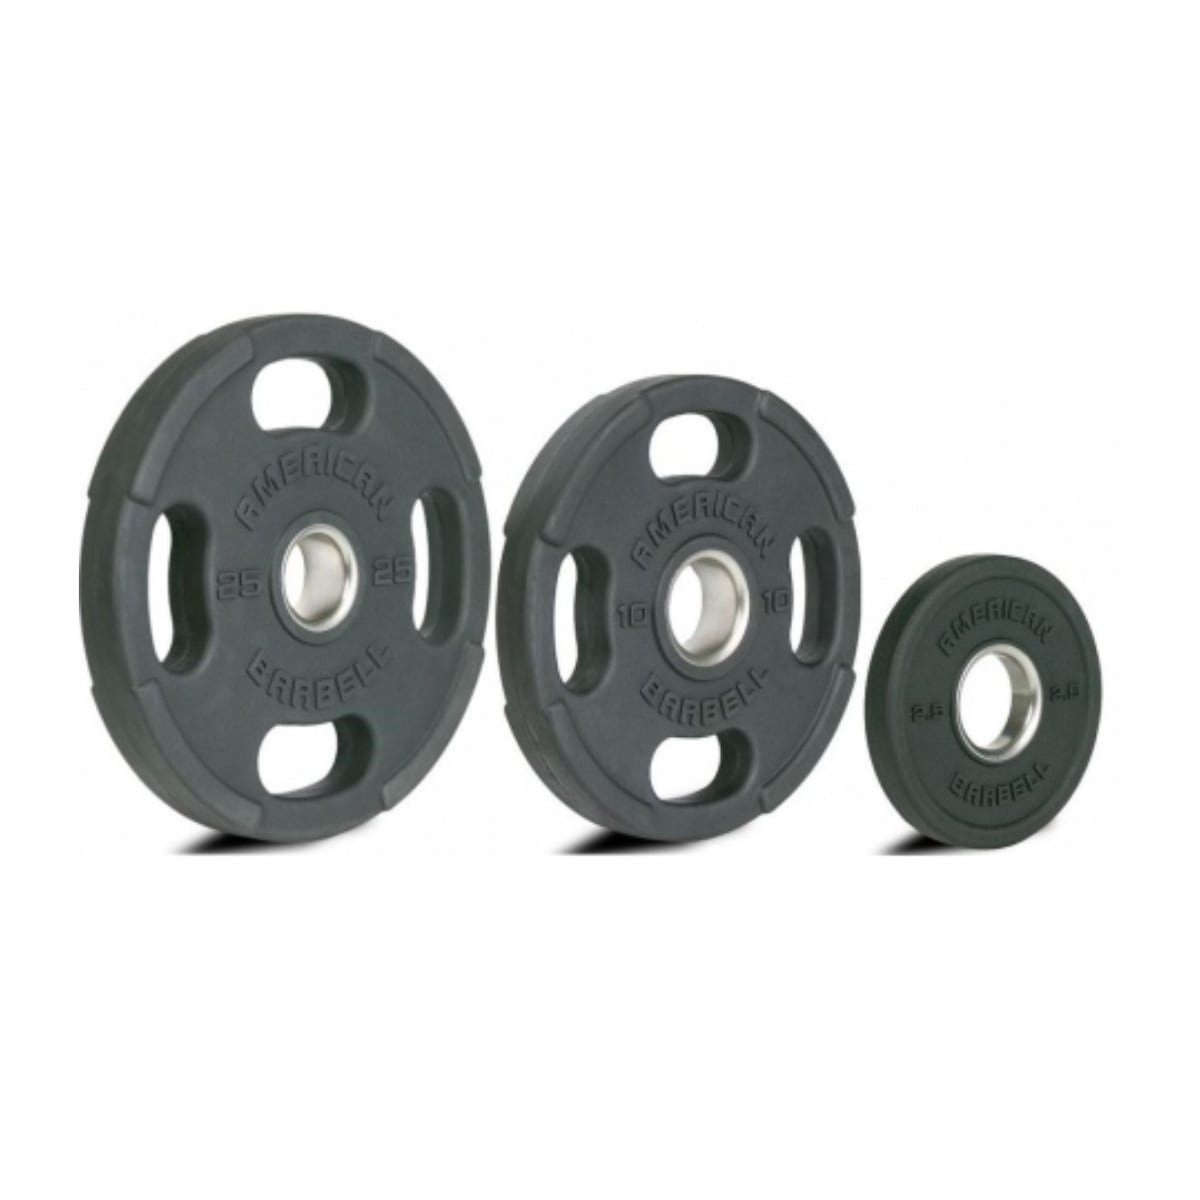 American Barbell Olympic Rubber Plate 1,25 kg